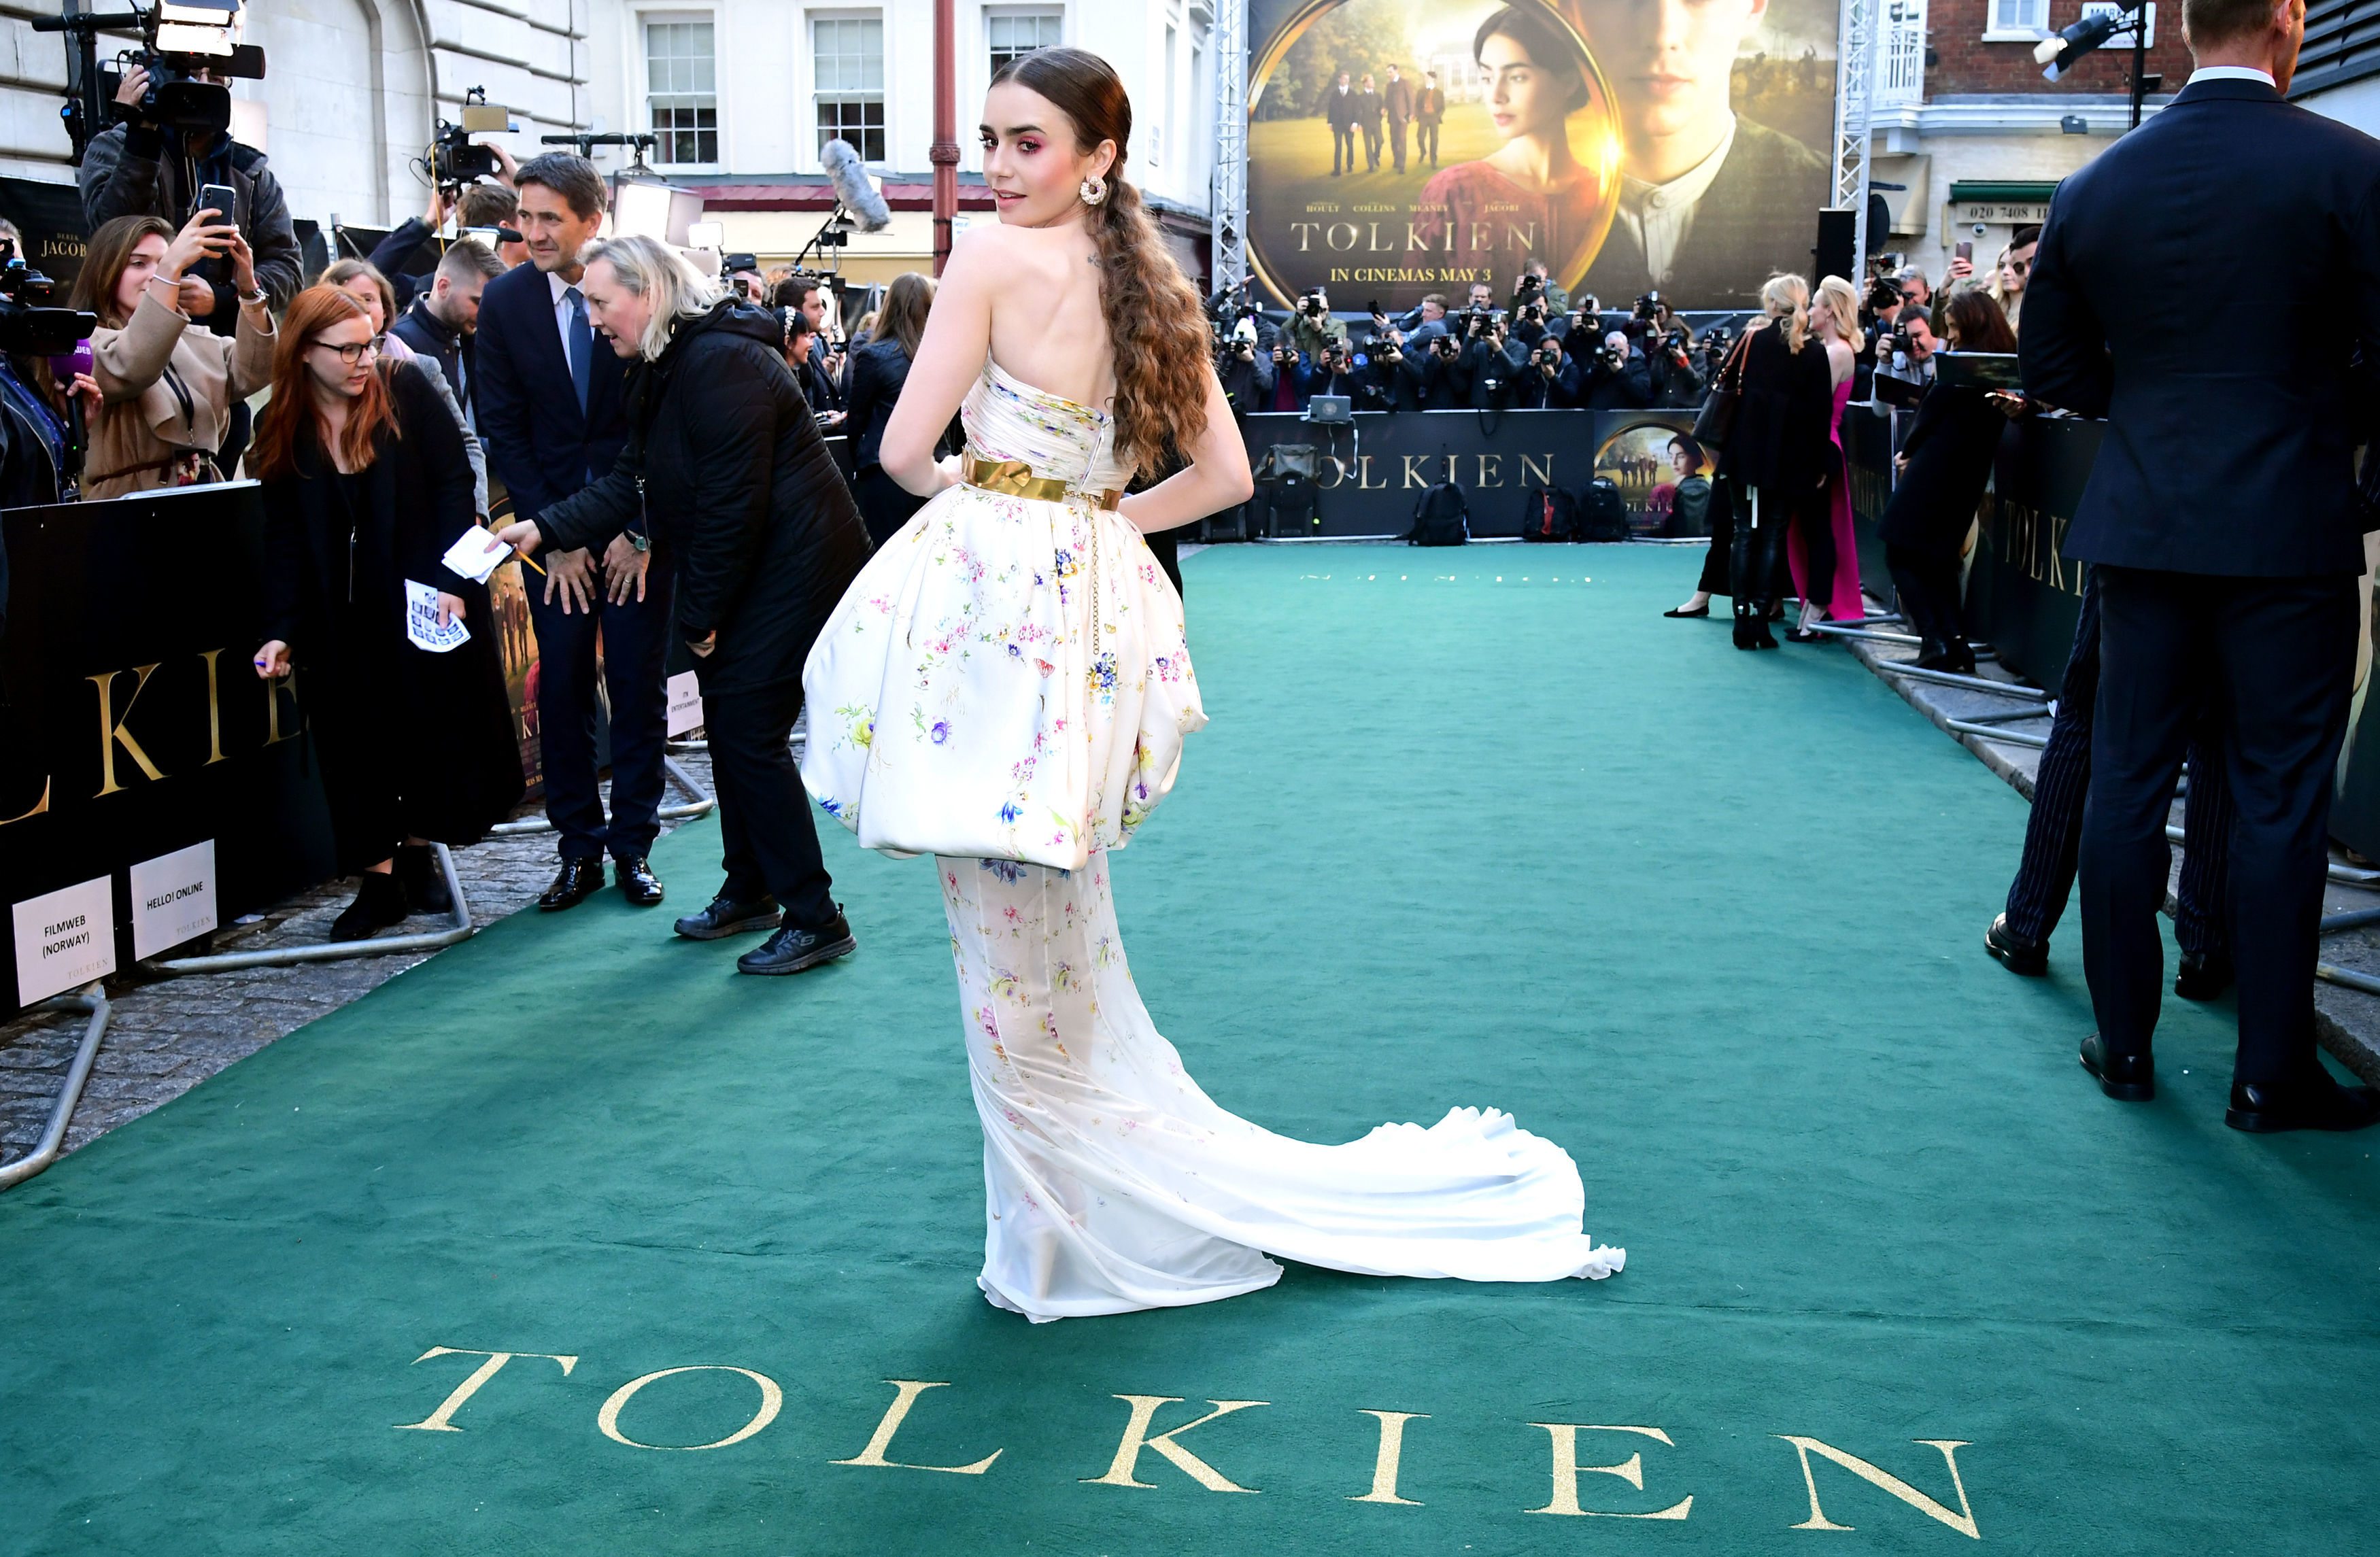 Lily Collins attending the UK premiere of Tolkien held at Curzon Mayfair, London .